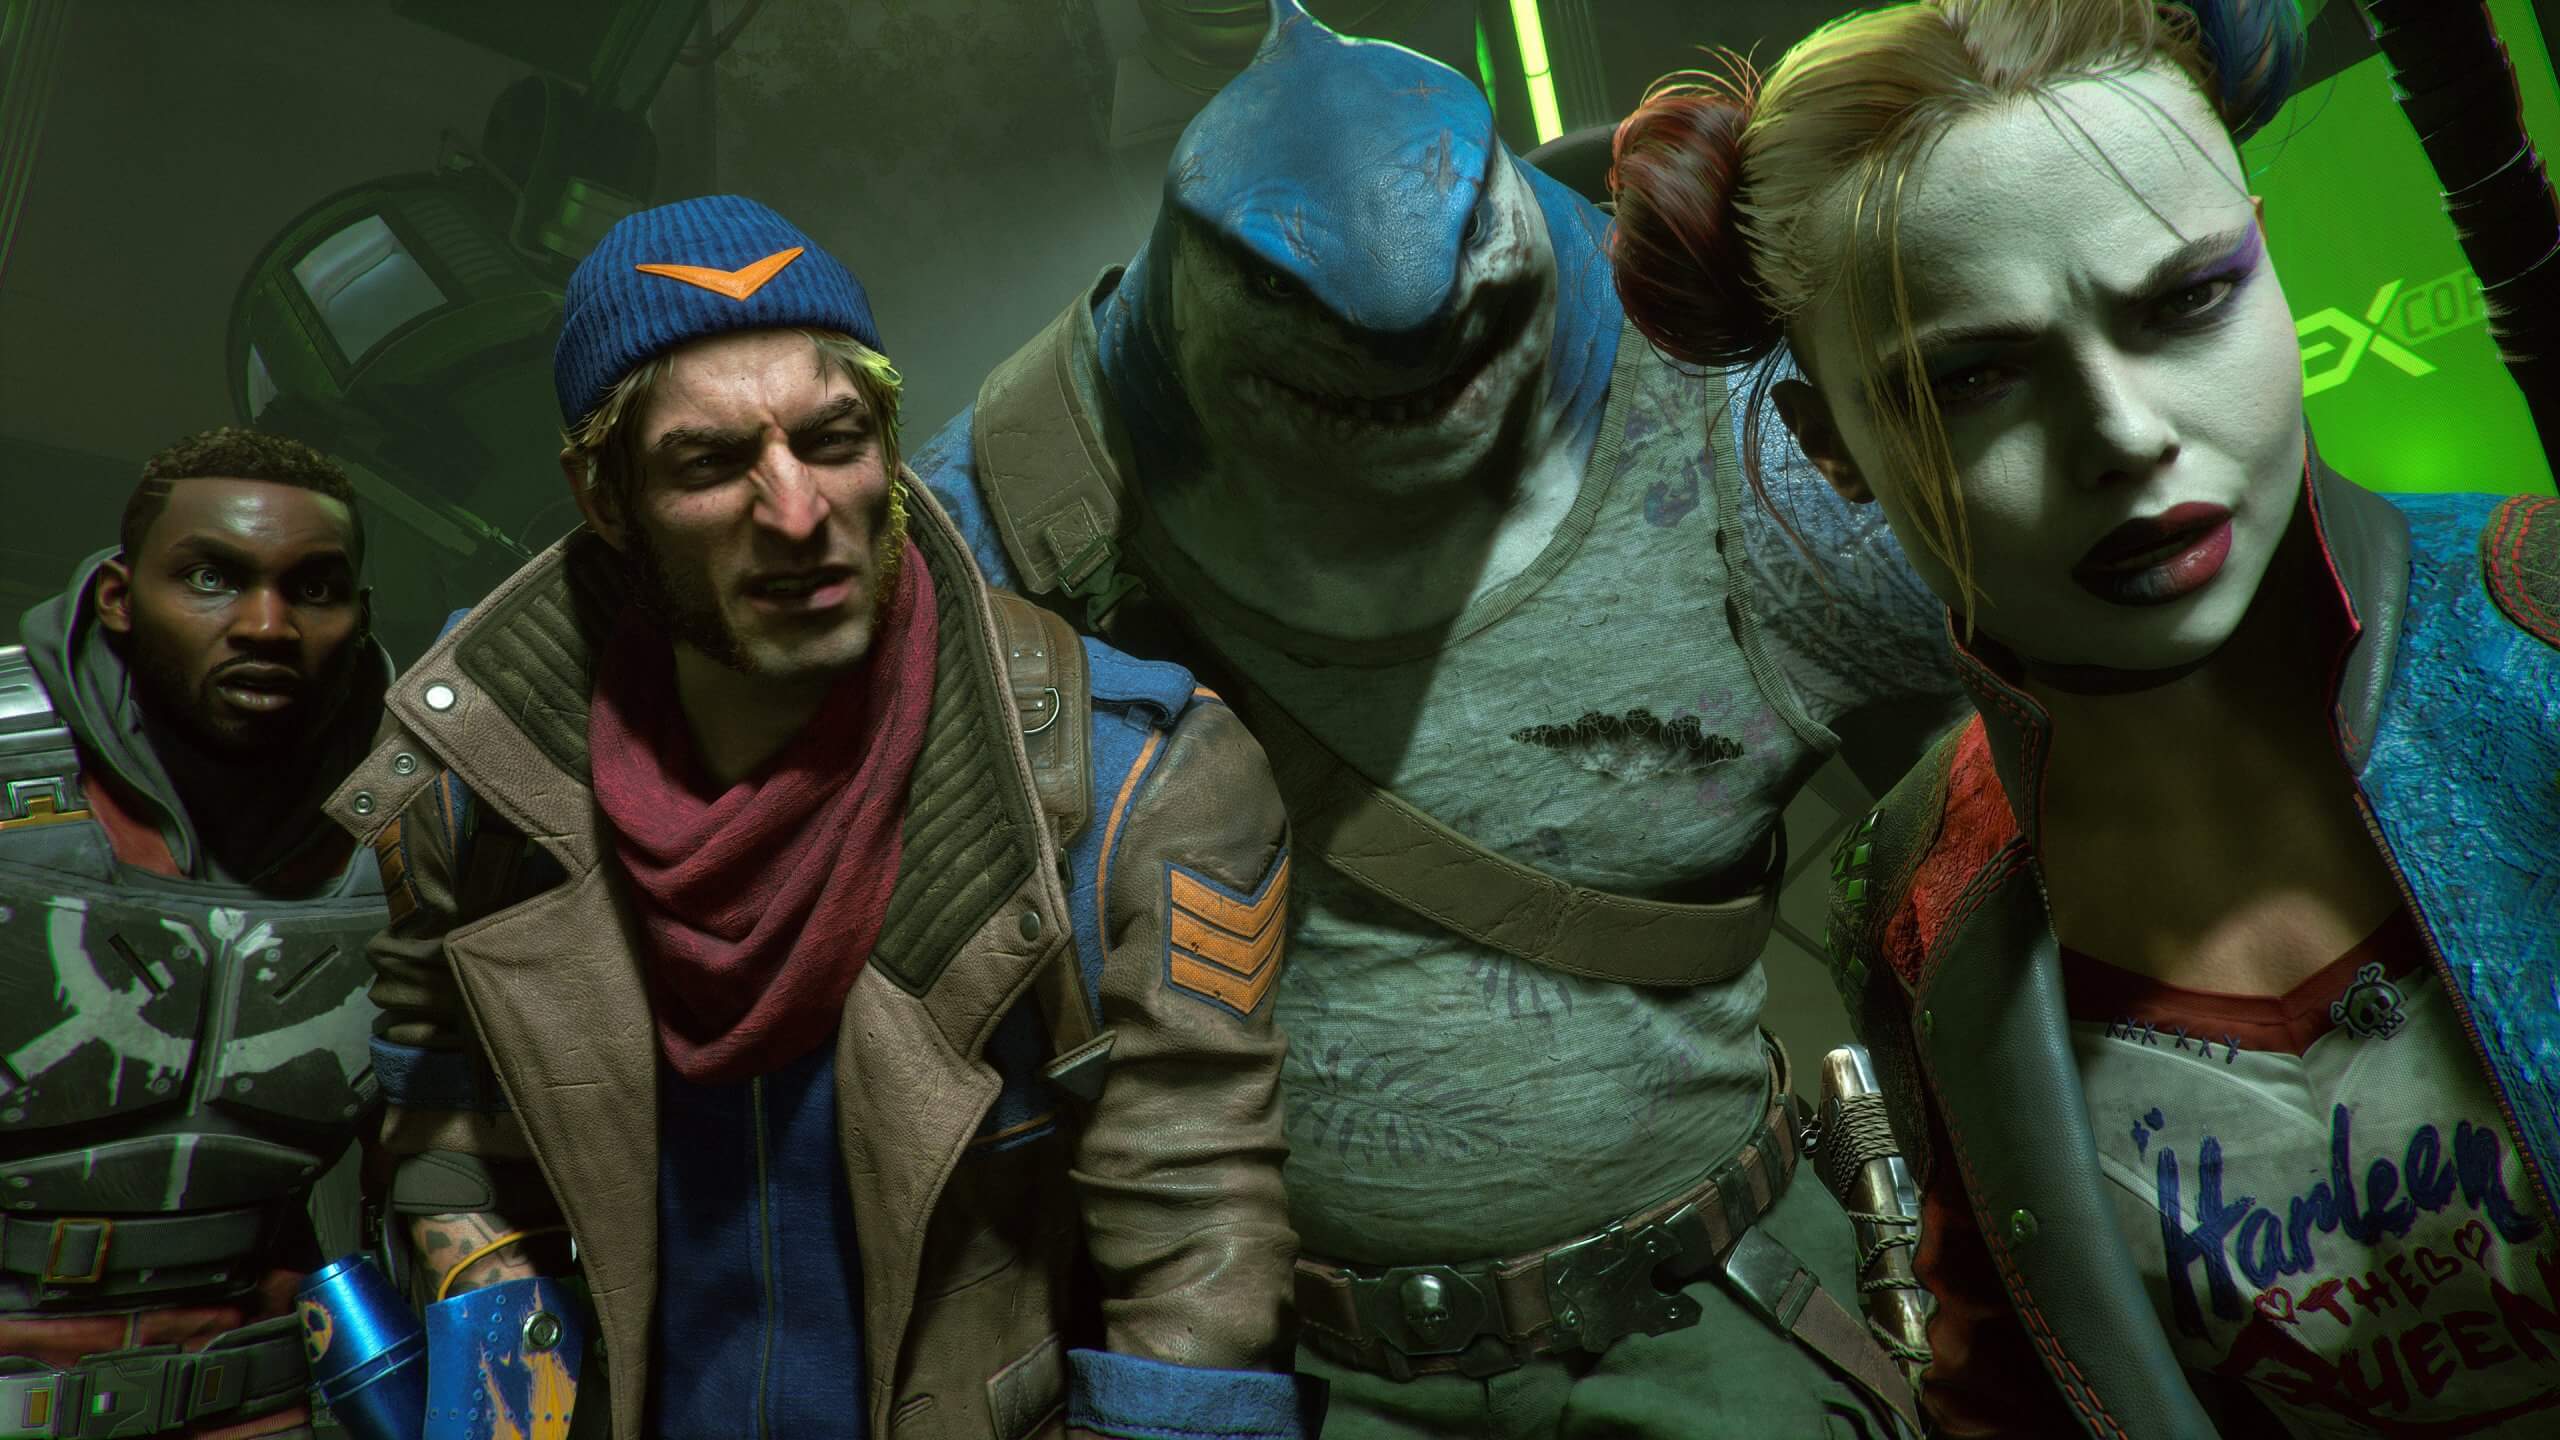 Warner Bros calls Suicide Squad: Kill the Justice League a “disappointment”